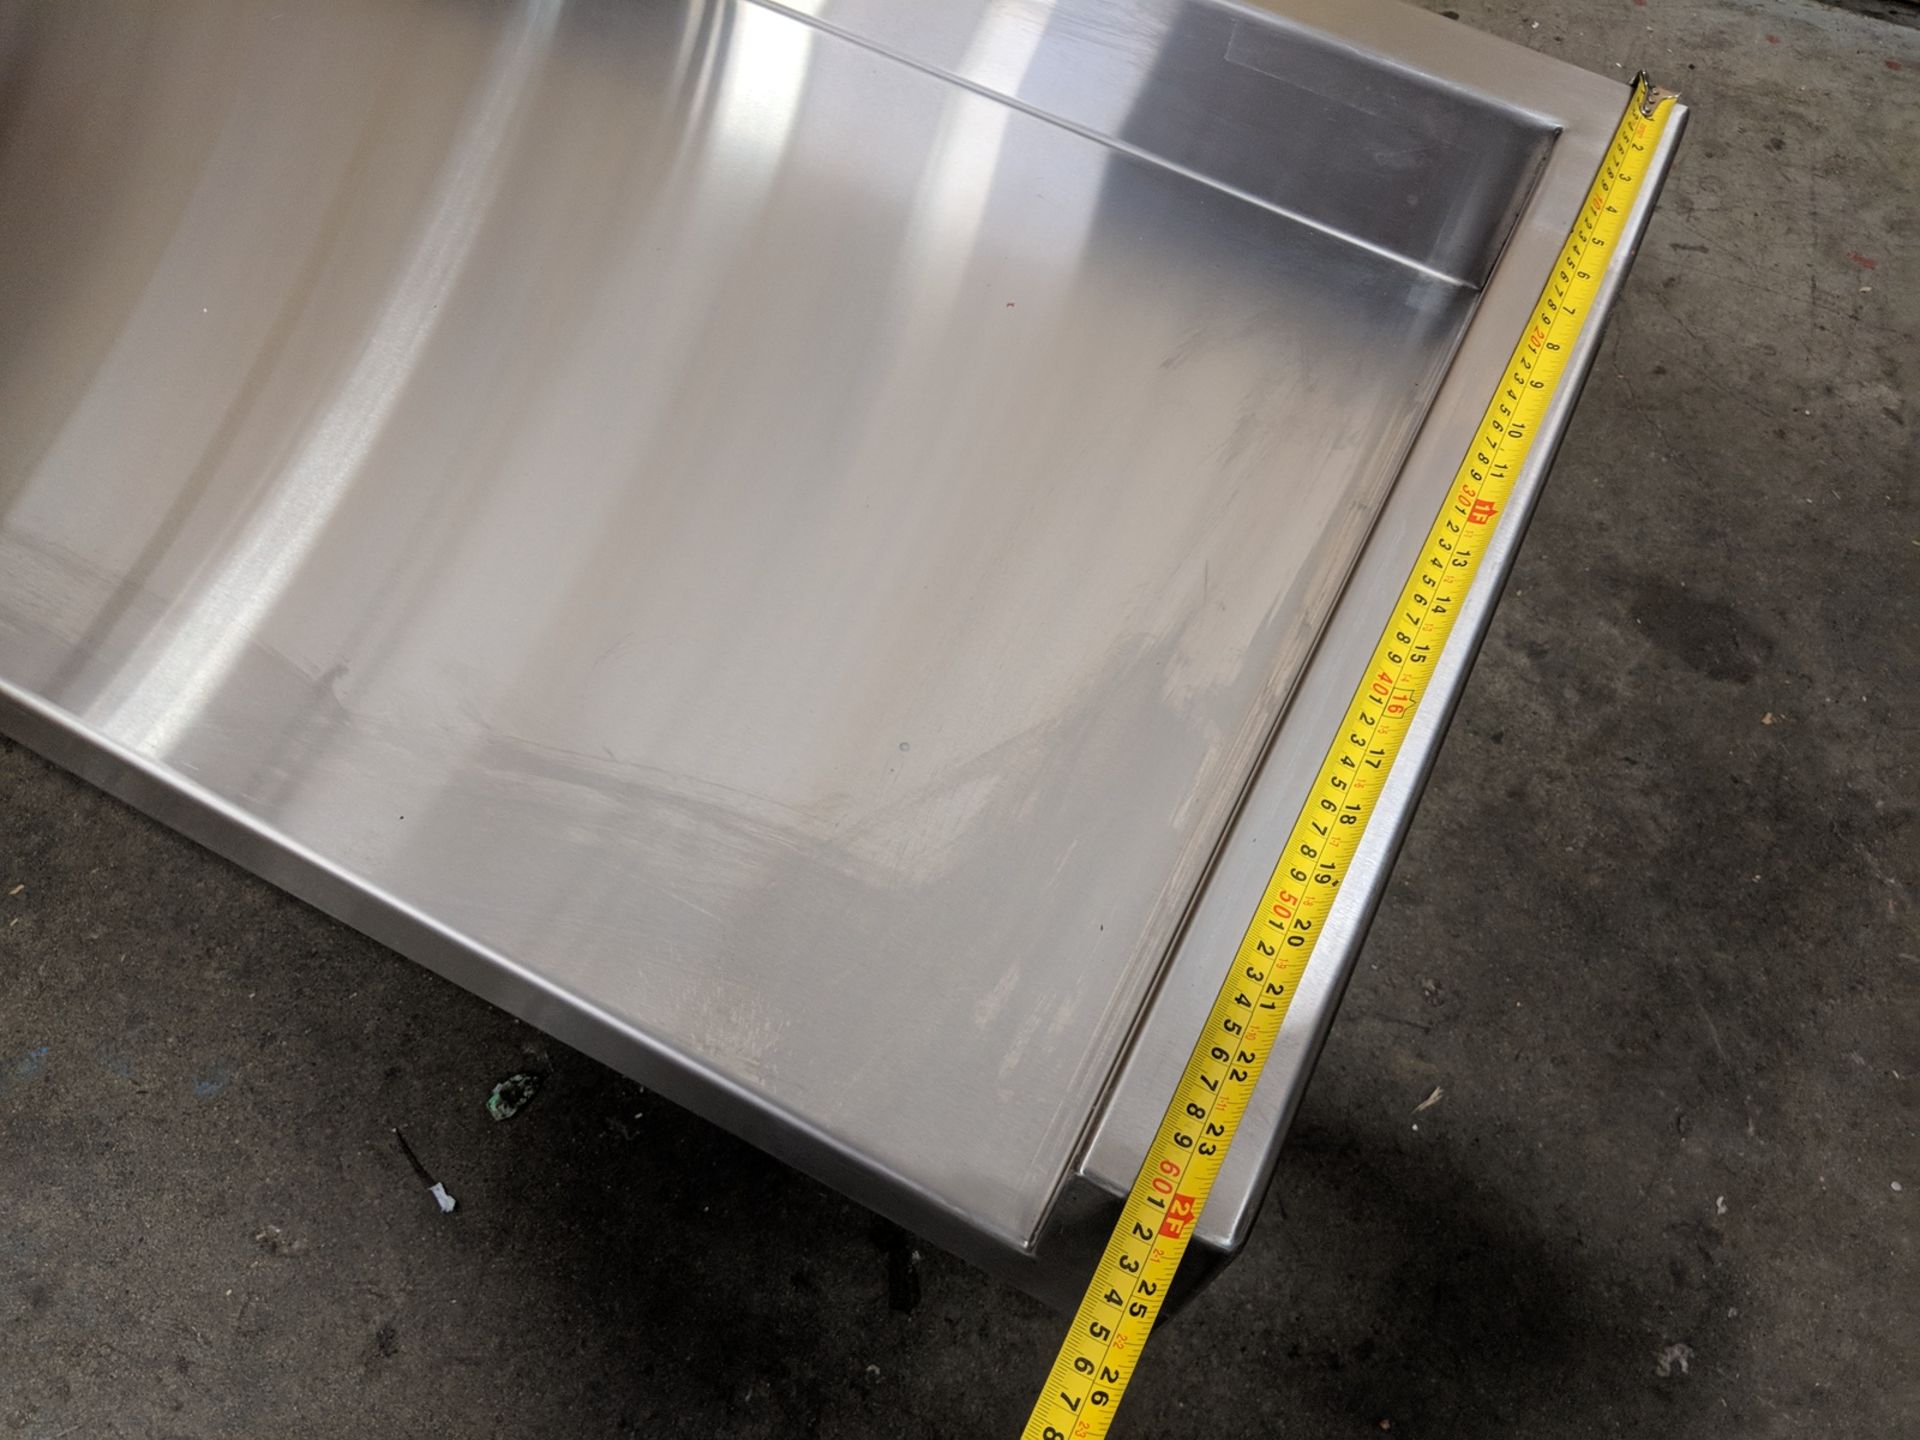 24" x 90" Custom Sink and Tabling, Fully Welded with Drains - Image 3 of 9